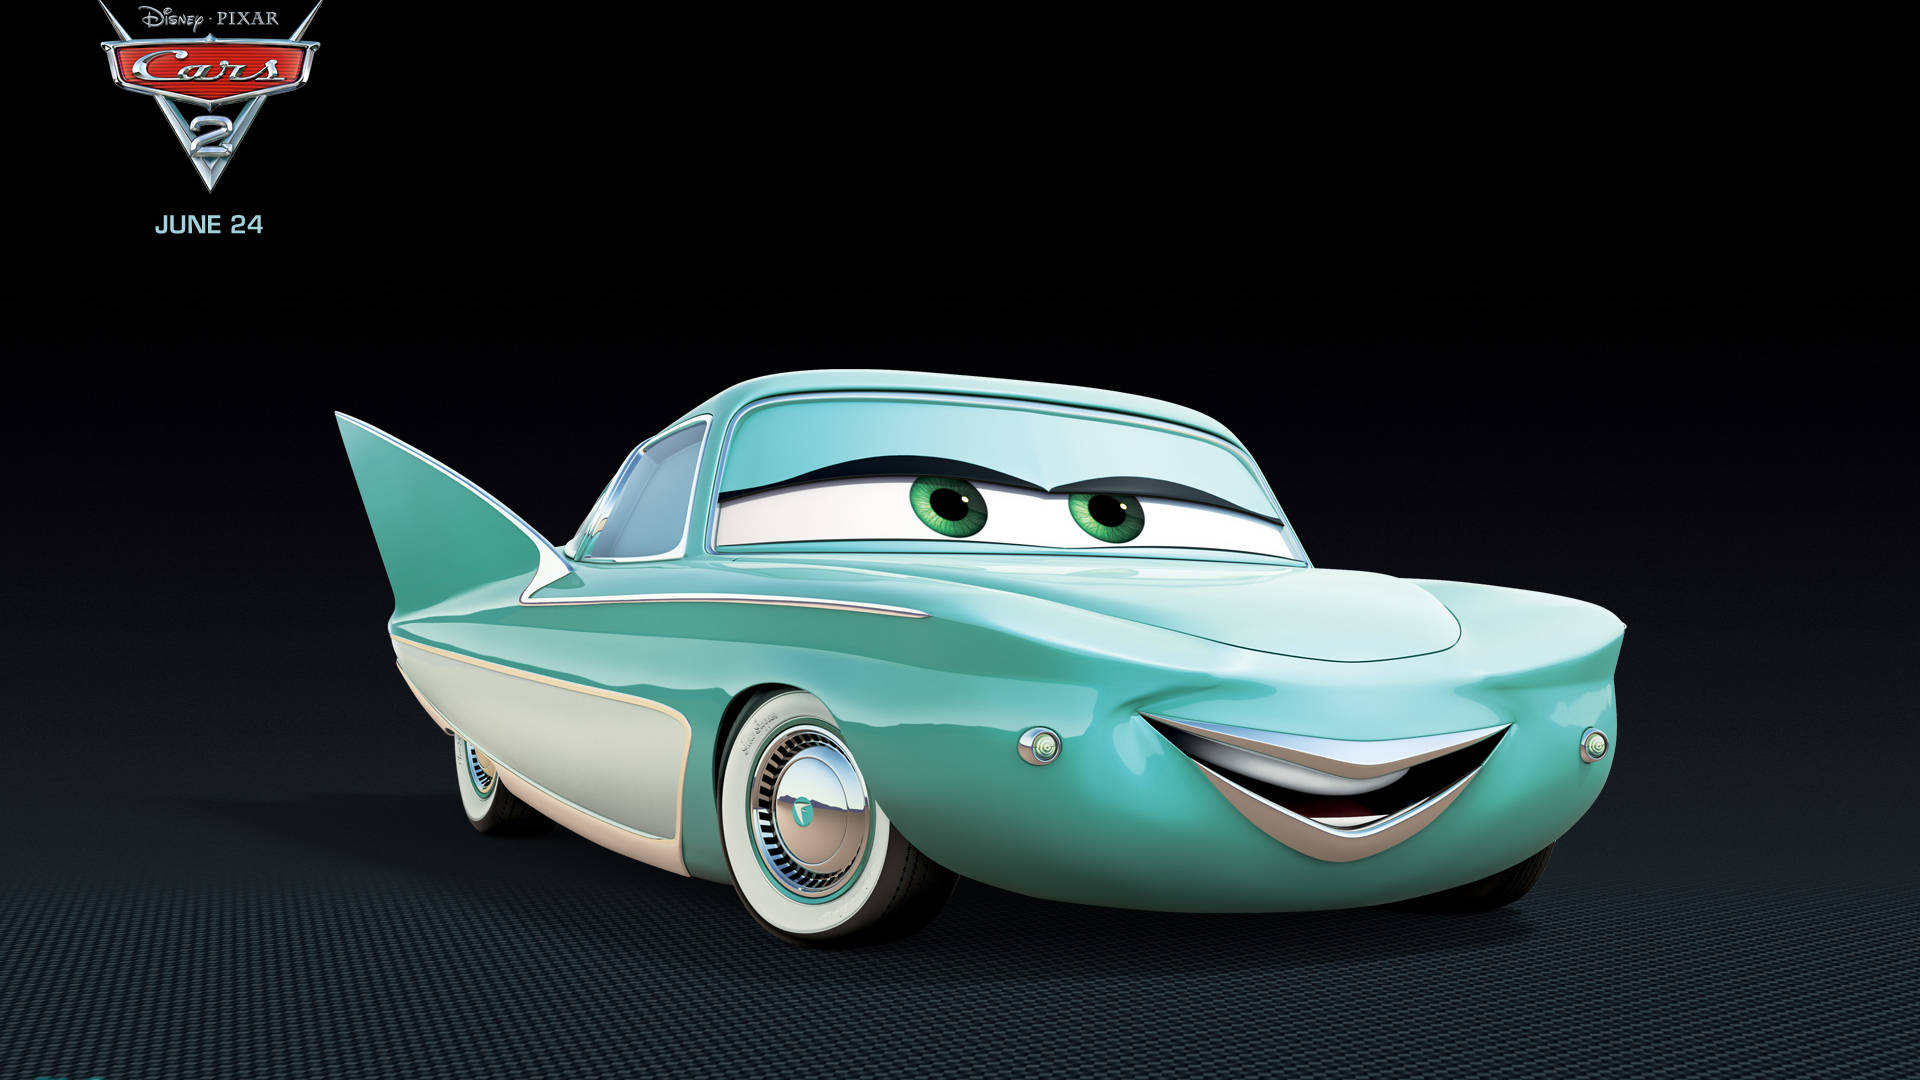 Flo From Pixar's Cars